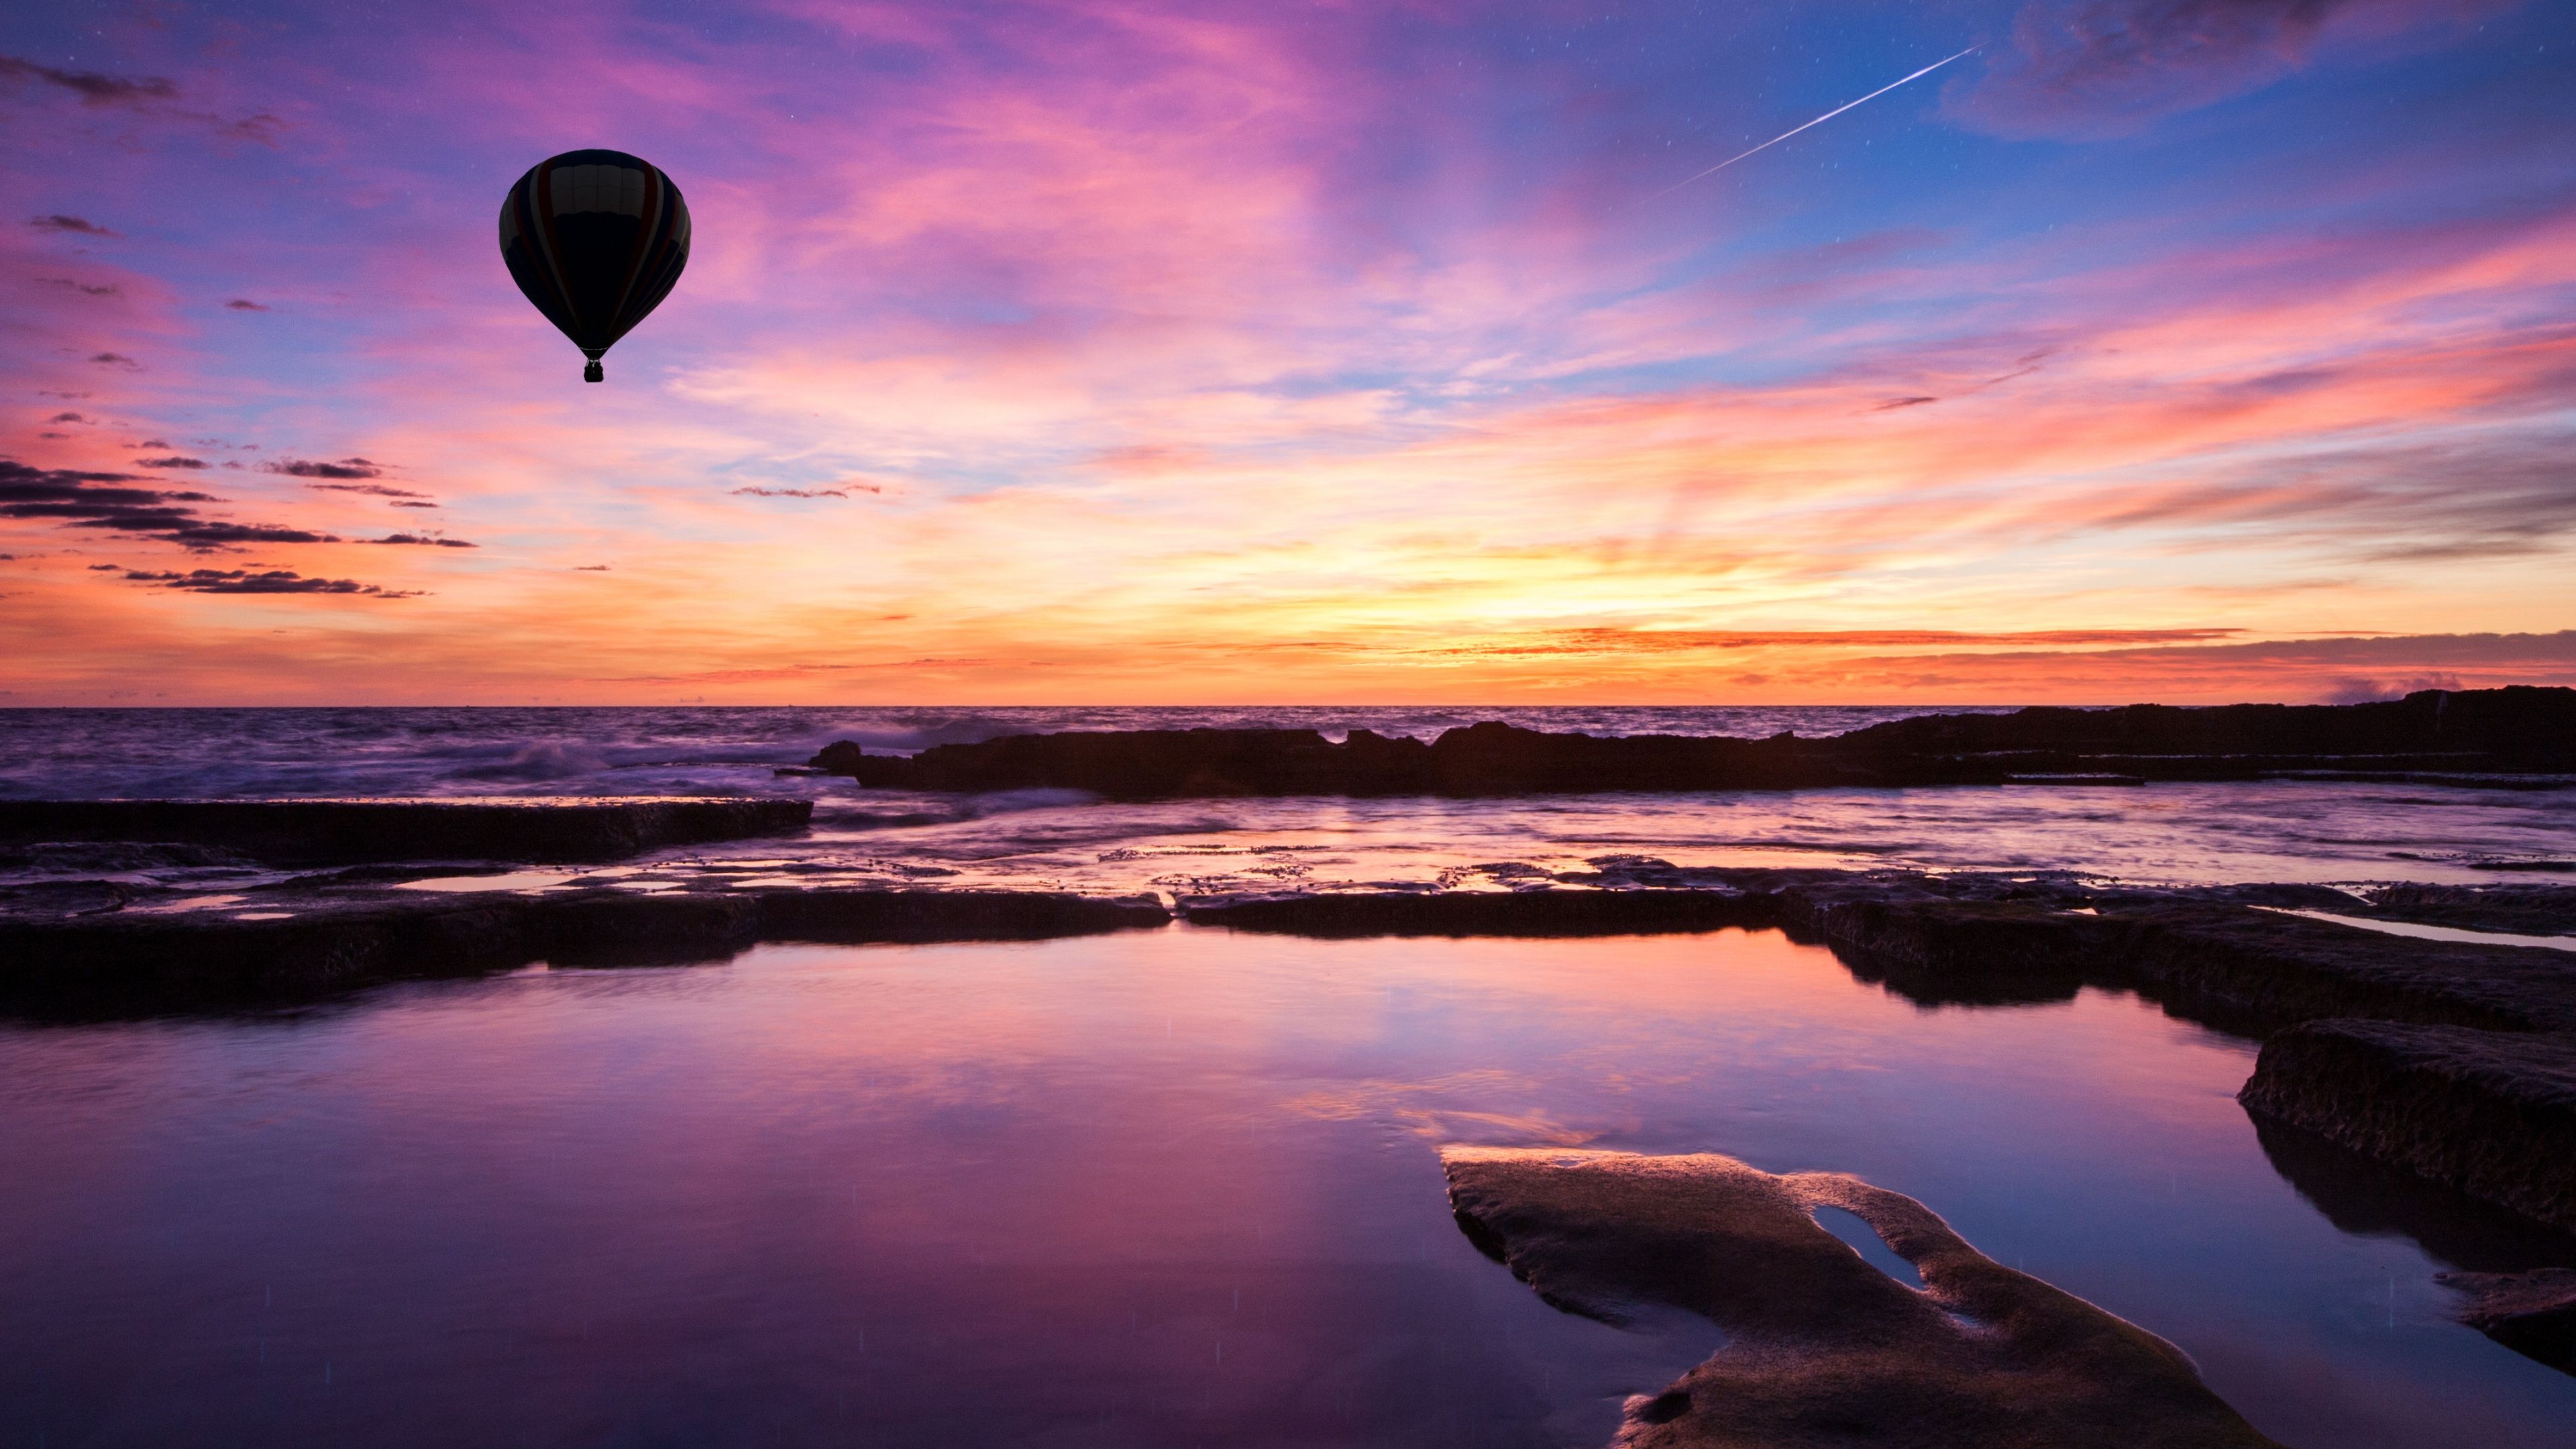 Hot air balloon flying over the ocean during a colorful sunset - Hot air balloons